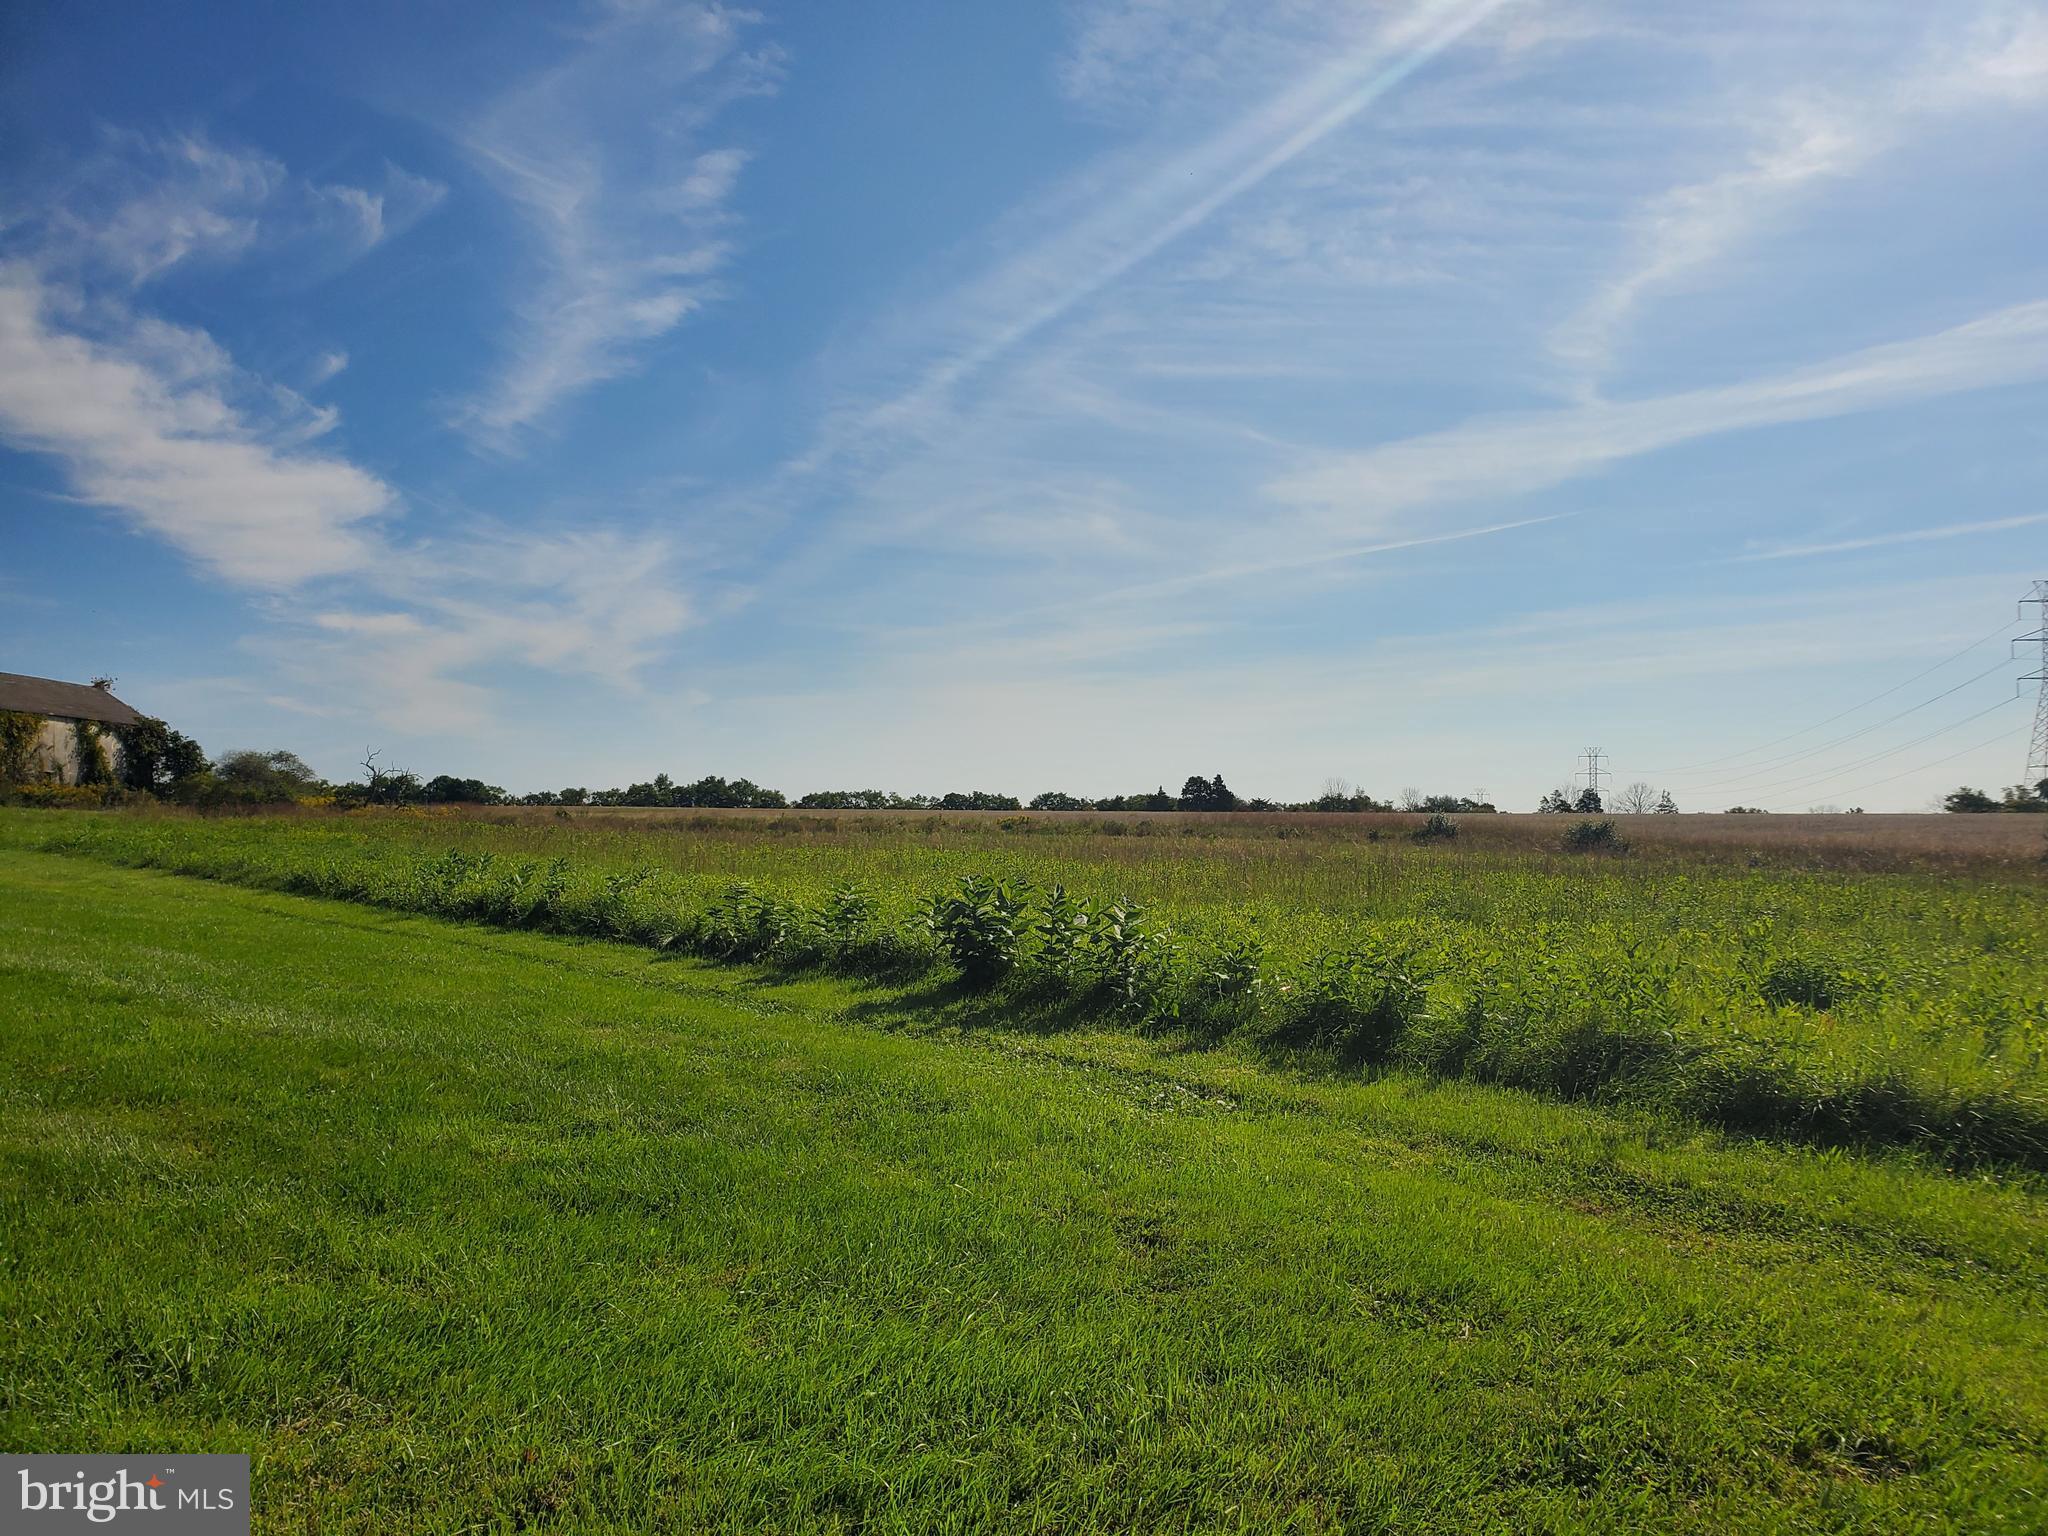 a view of a green field with clear sky